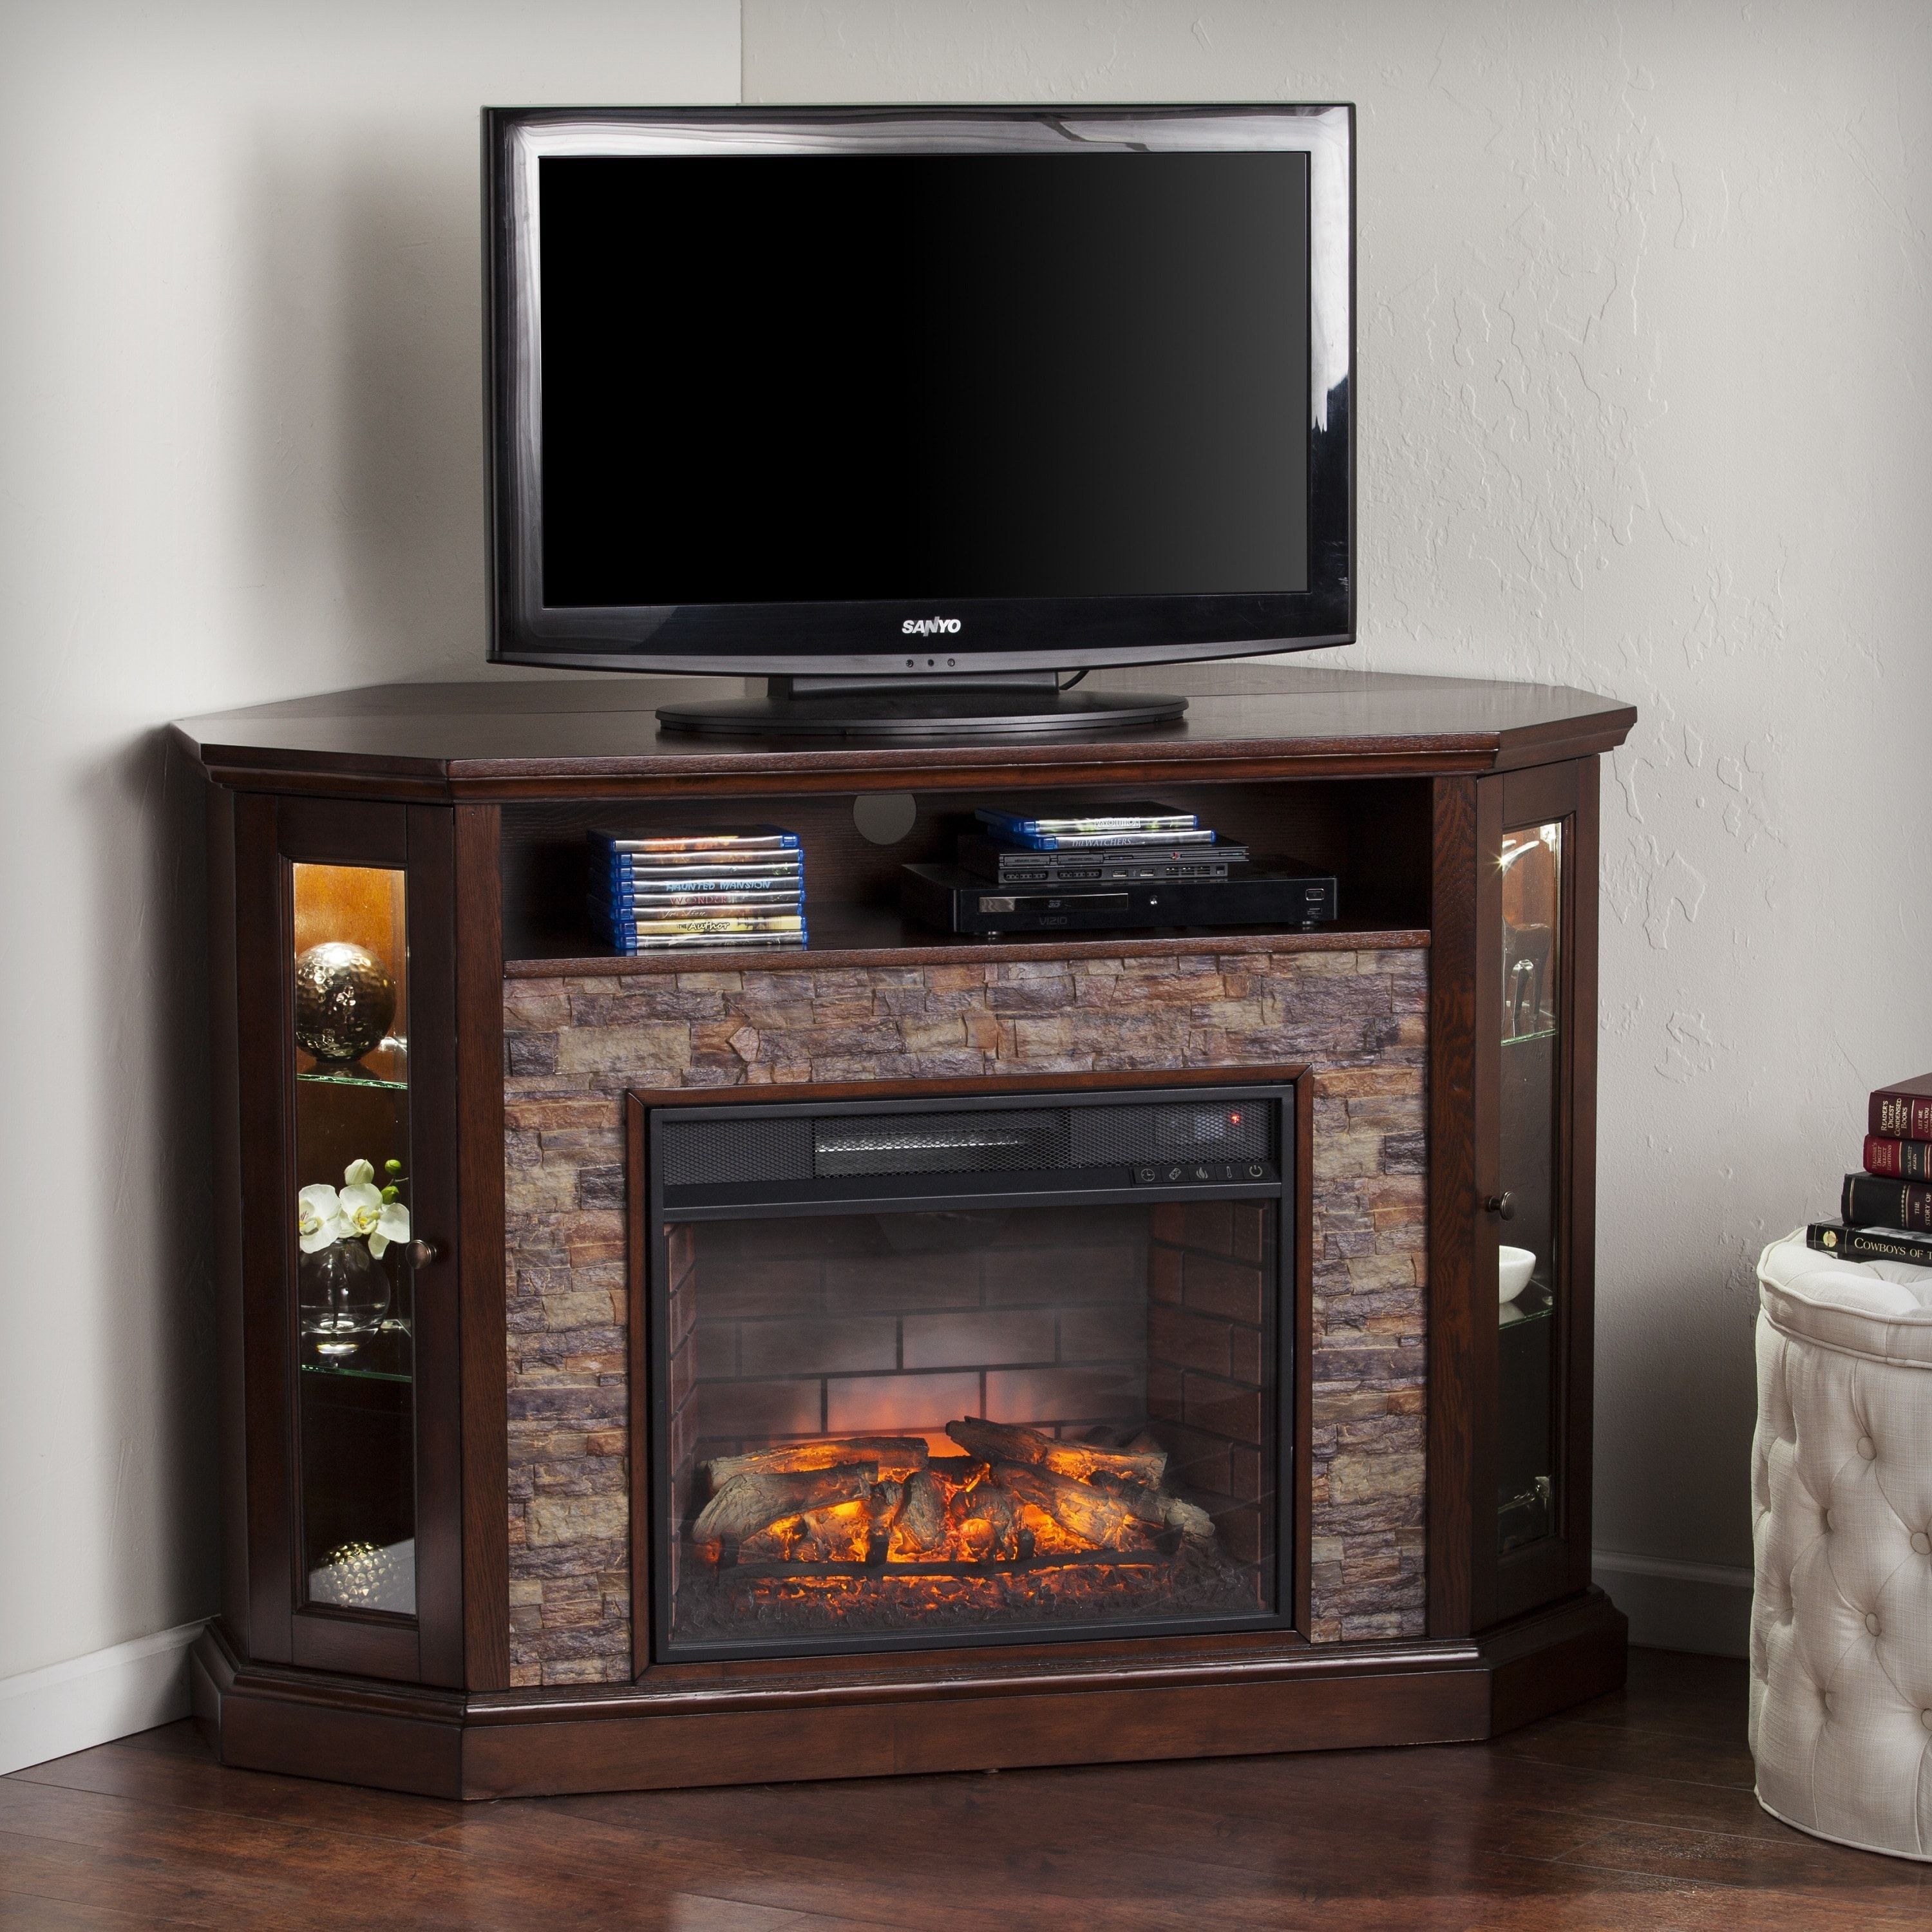 Contemporary Tv Stand with Fireplace Awesome Harper Blvd Ratner Faux Stone Corner Convertible Infrared